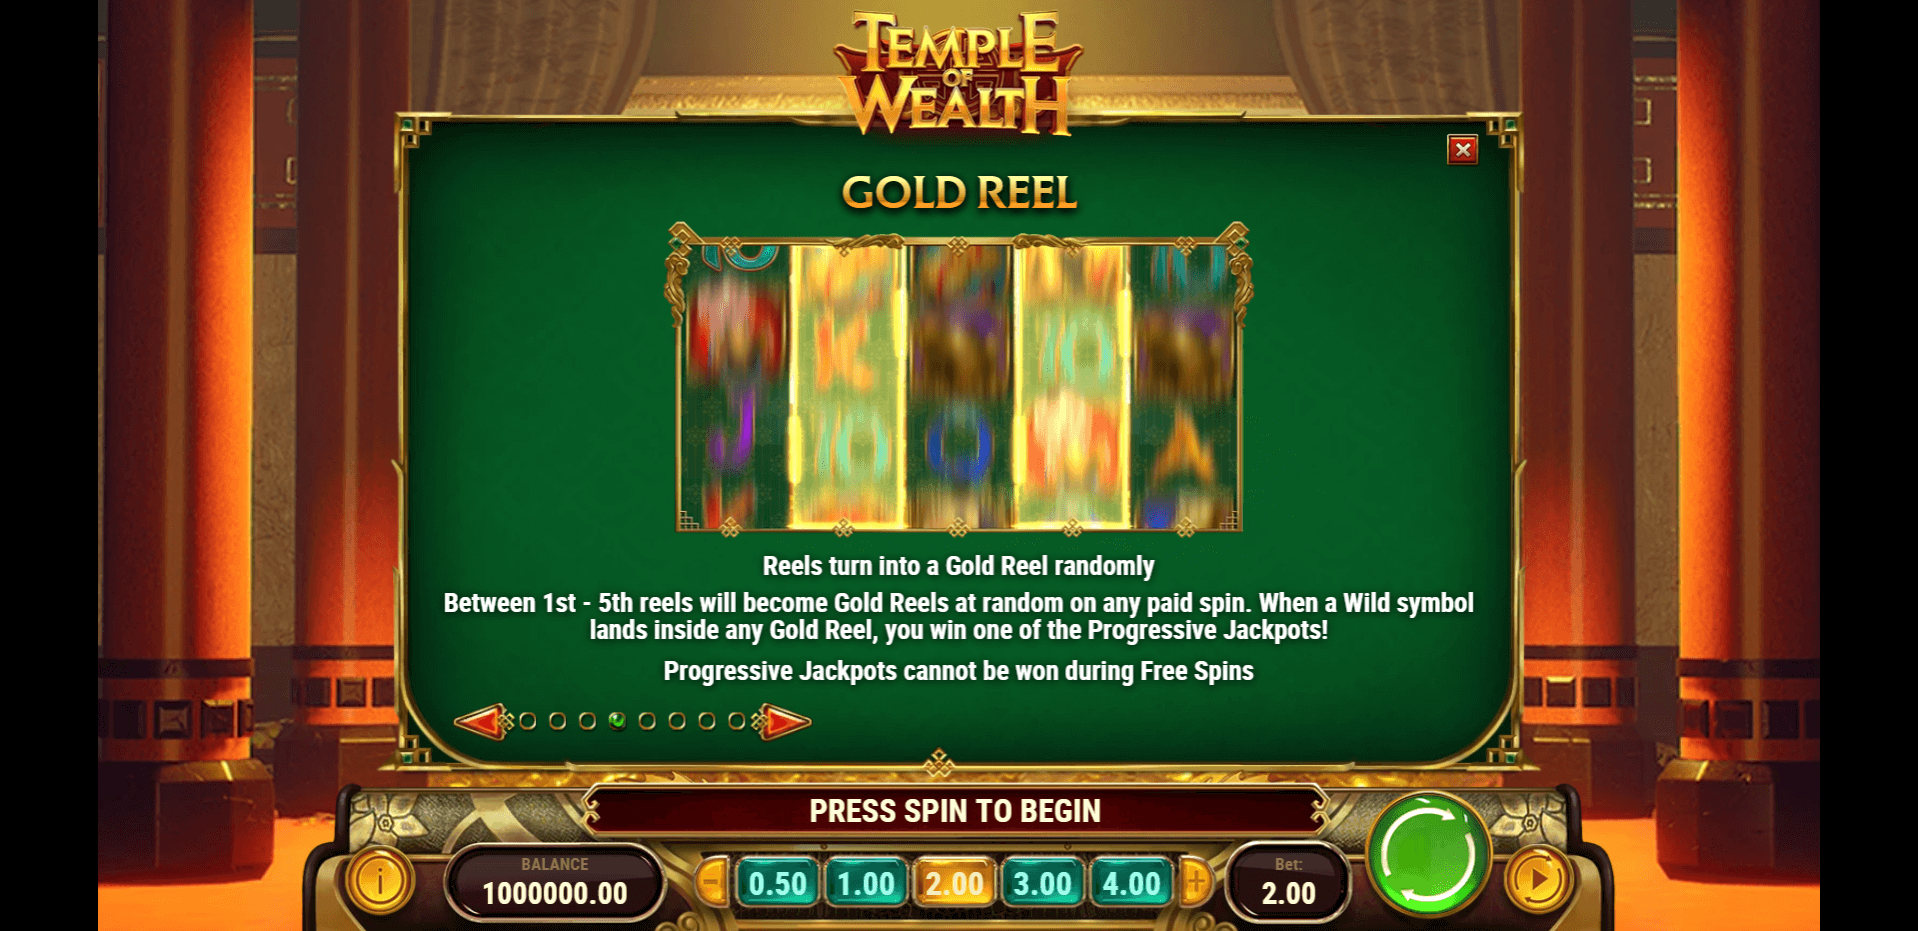 temple of wealth slot machine detail image 3